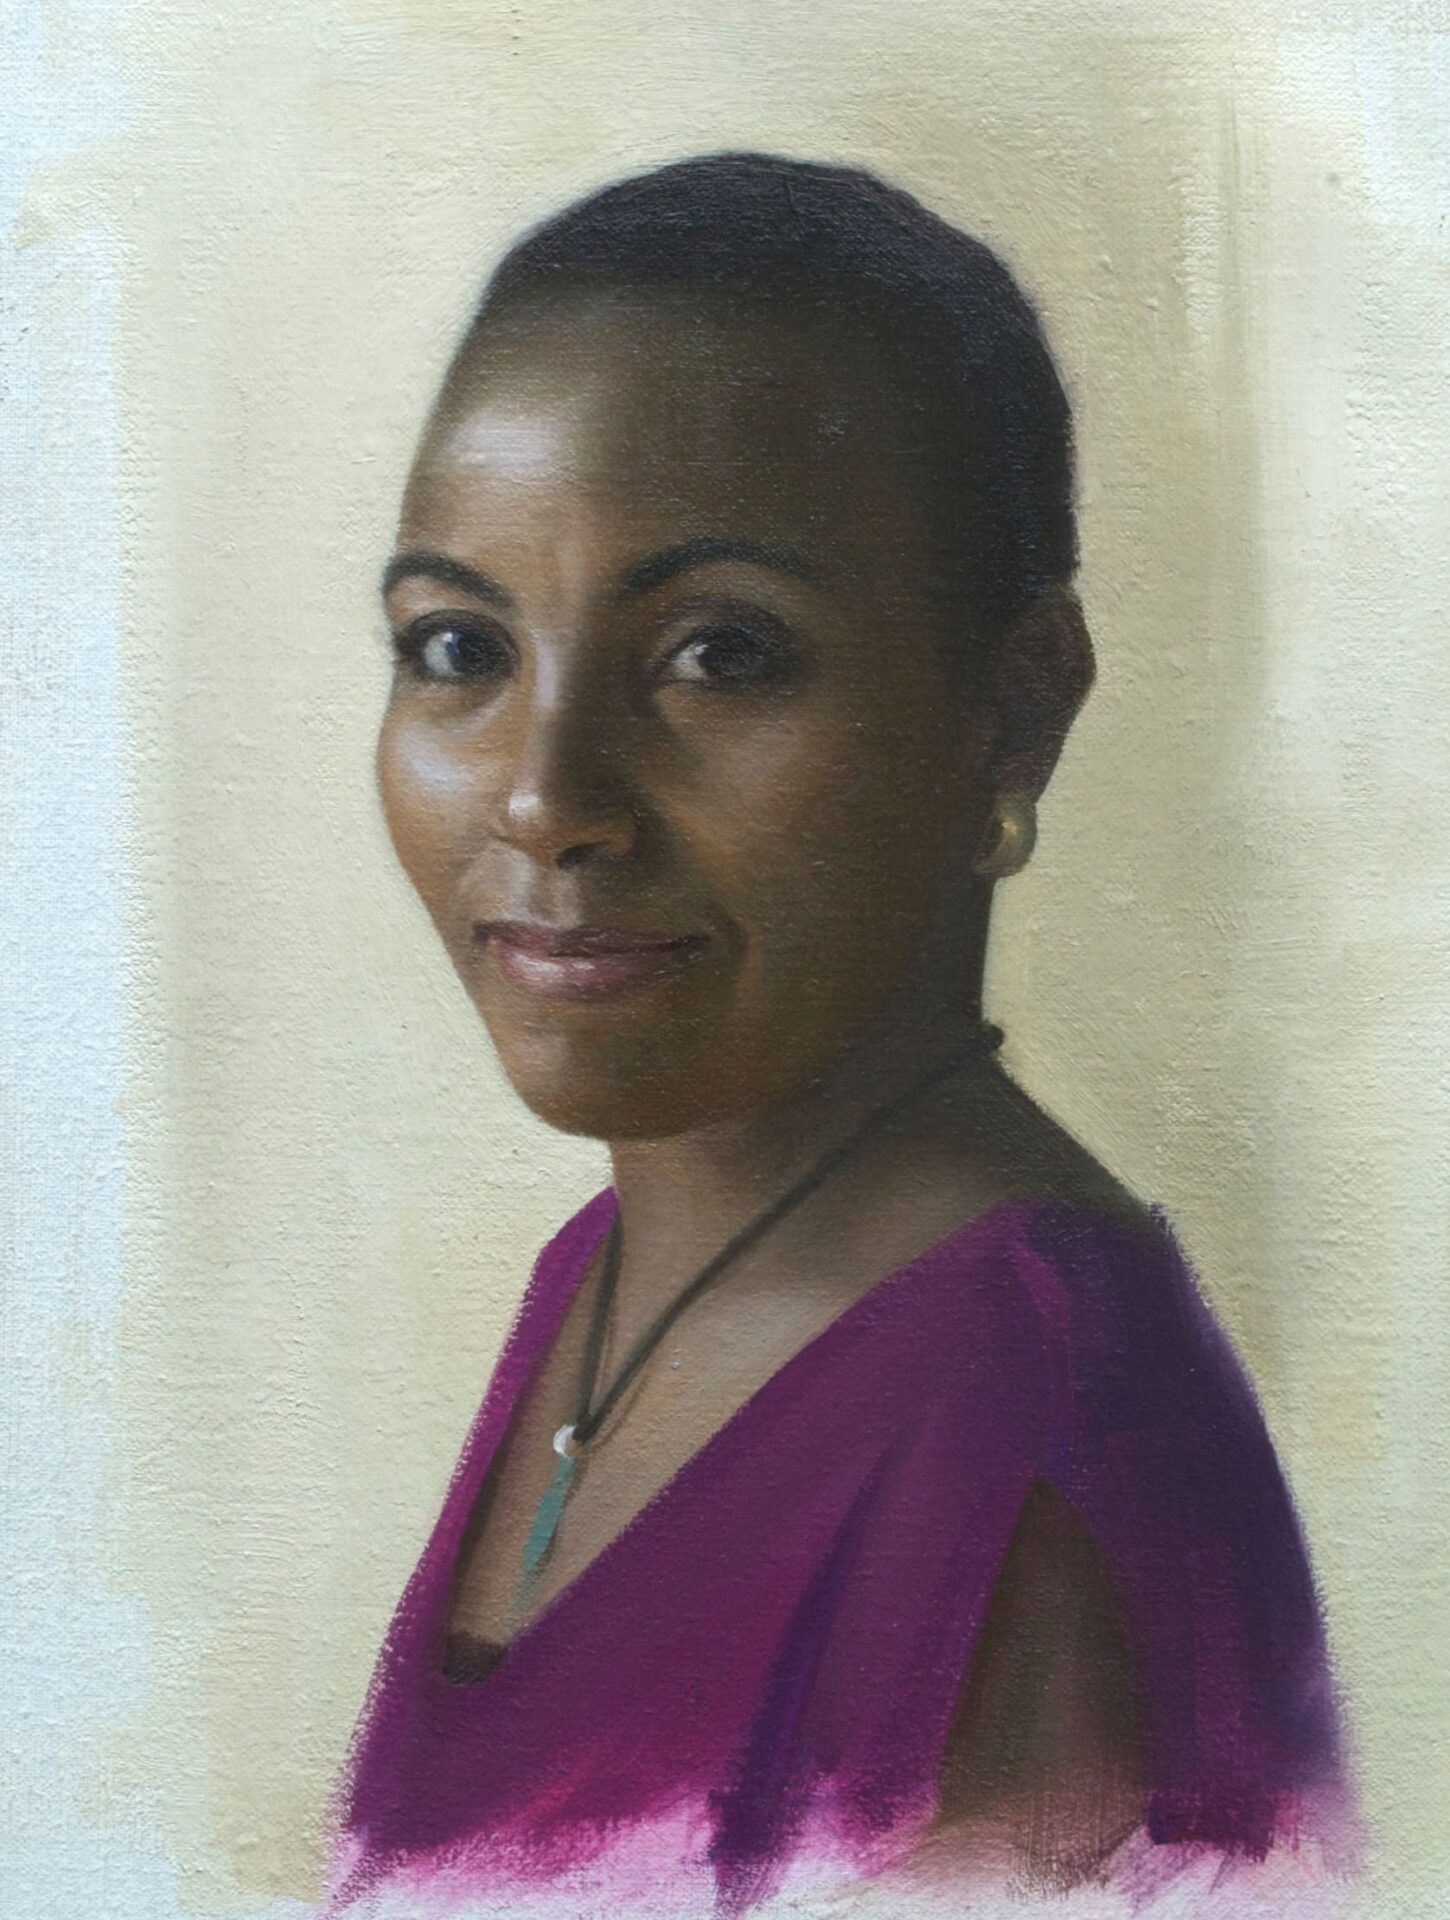 A portrait painting of an astonishing woman